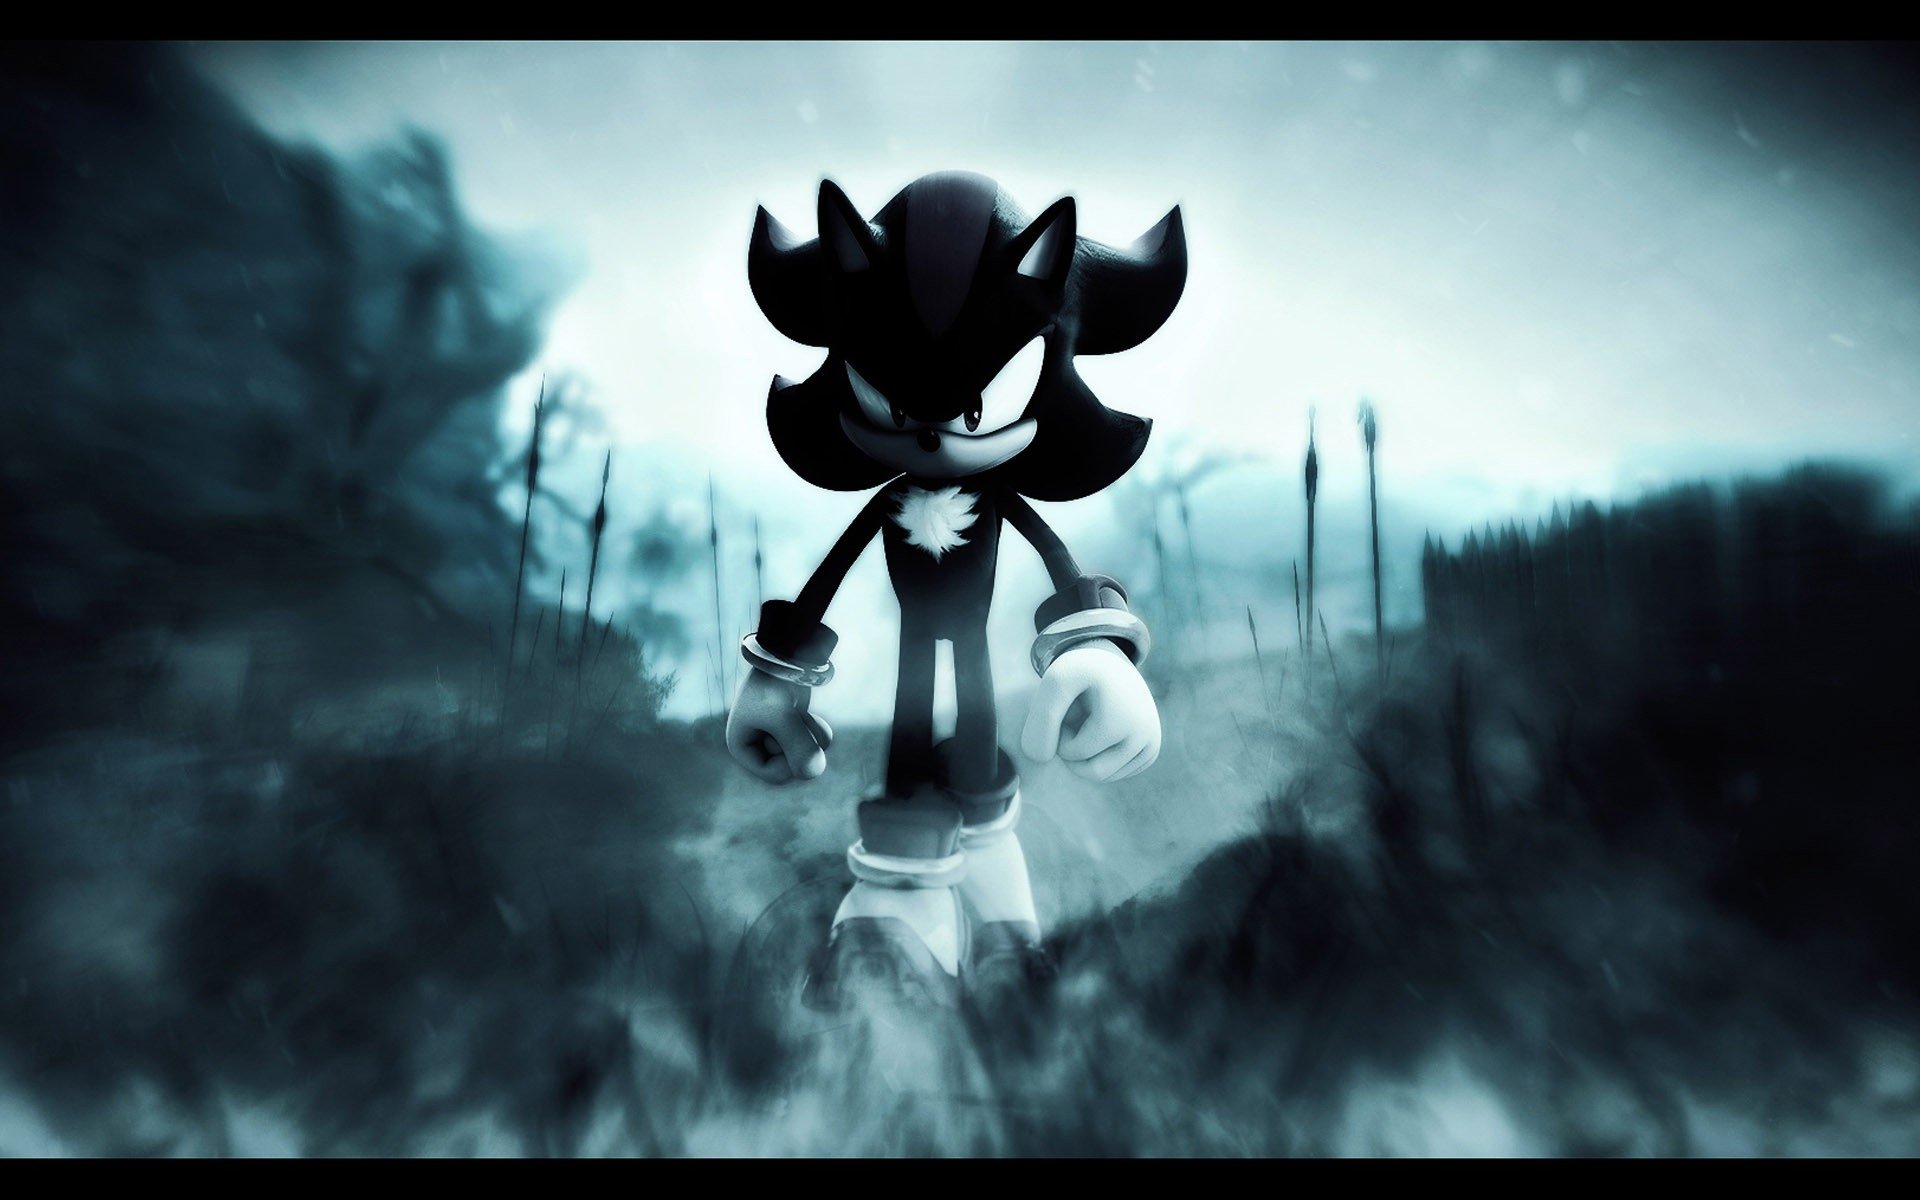 shadow the hedgehog wallpaper,sky,animation,darkness,fictional character,graphic design